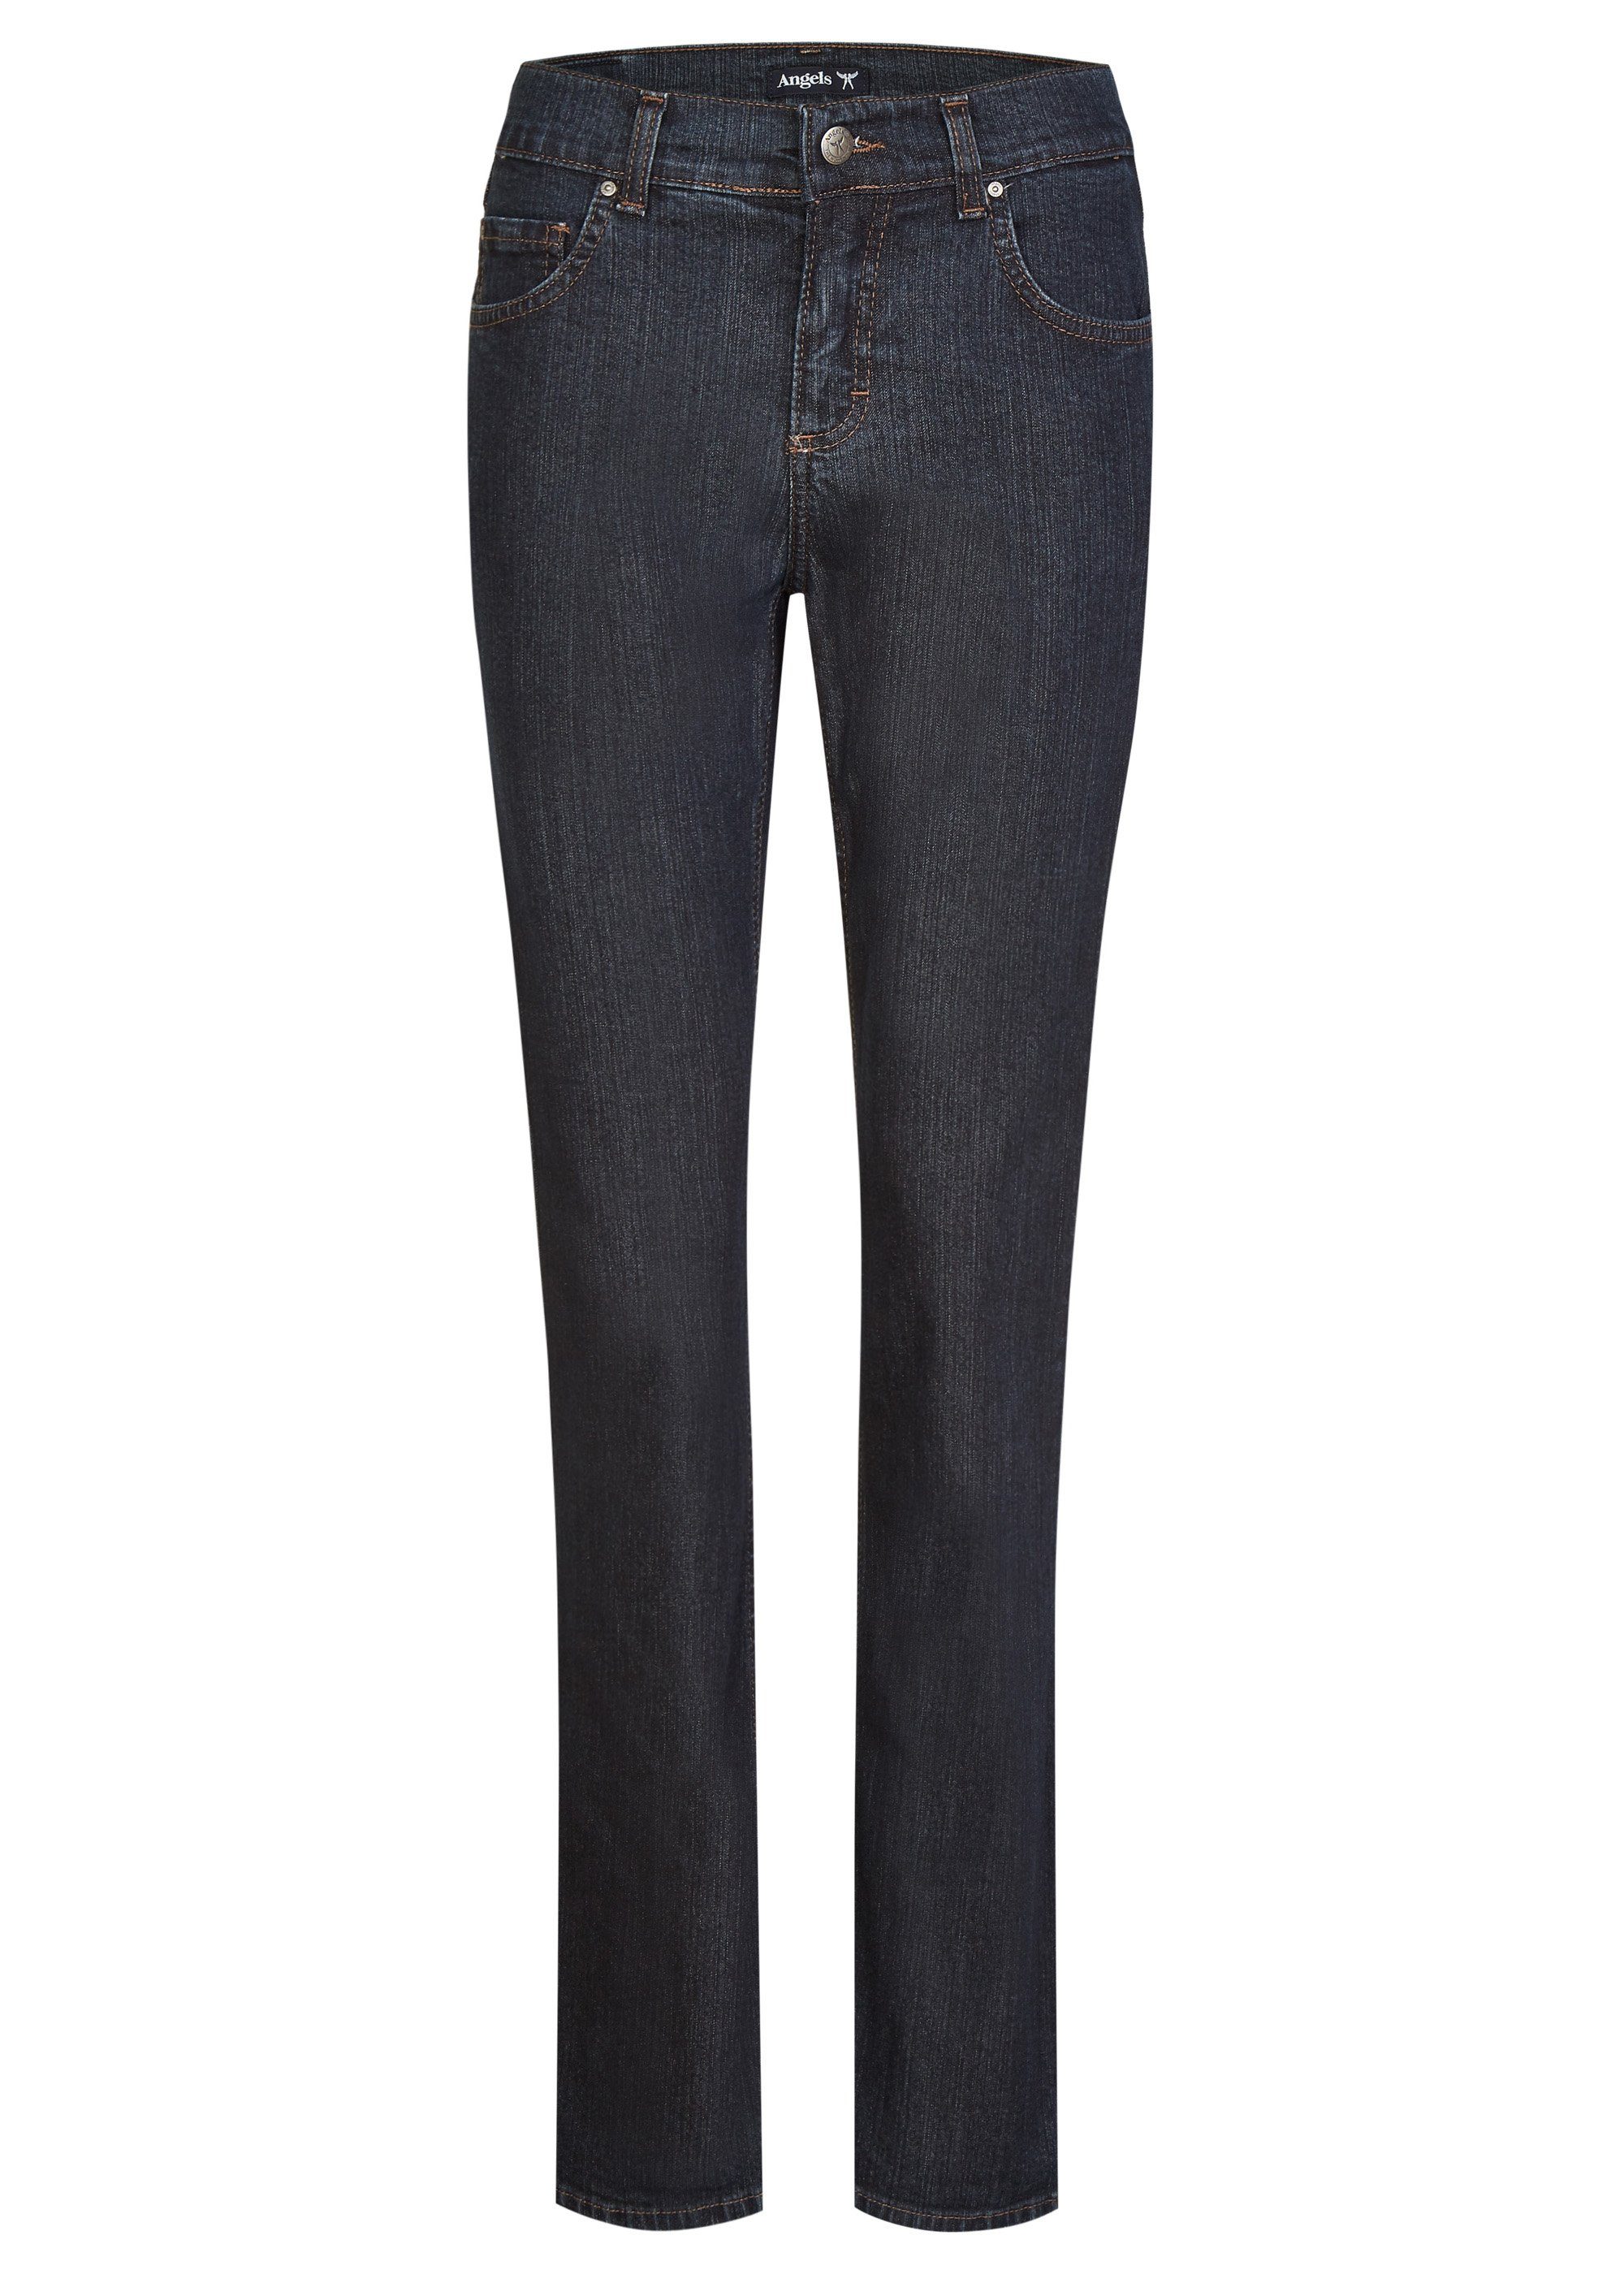 ANGELS Stretch-Jeans ANGELS night JEANS 90.30 53 LUCI blue